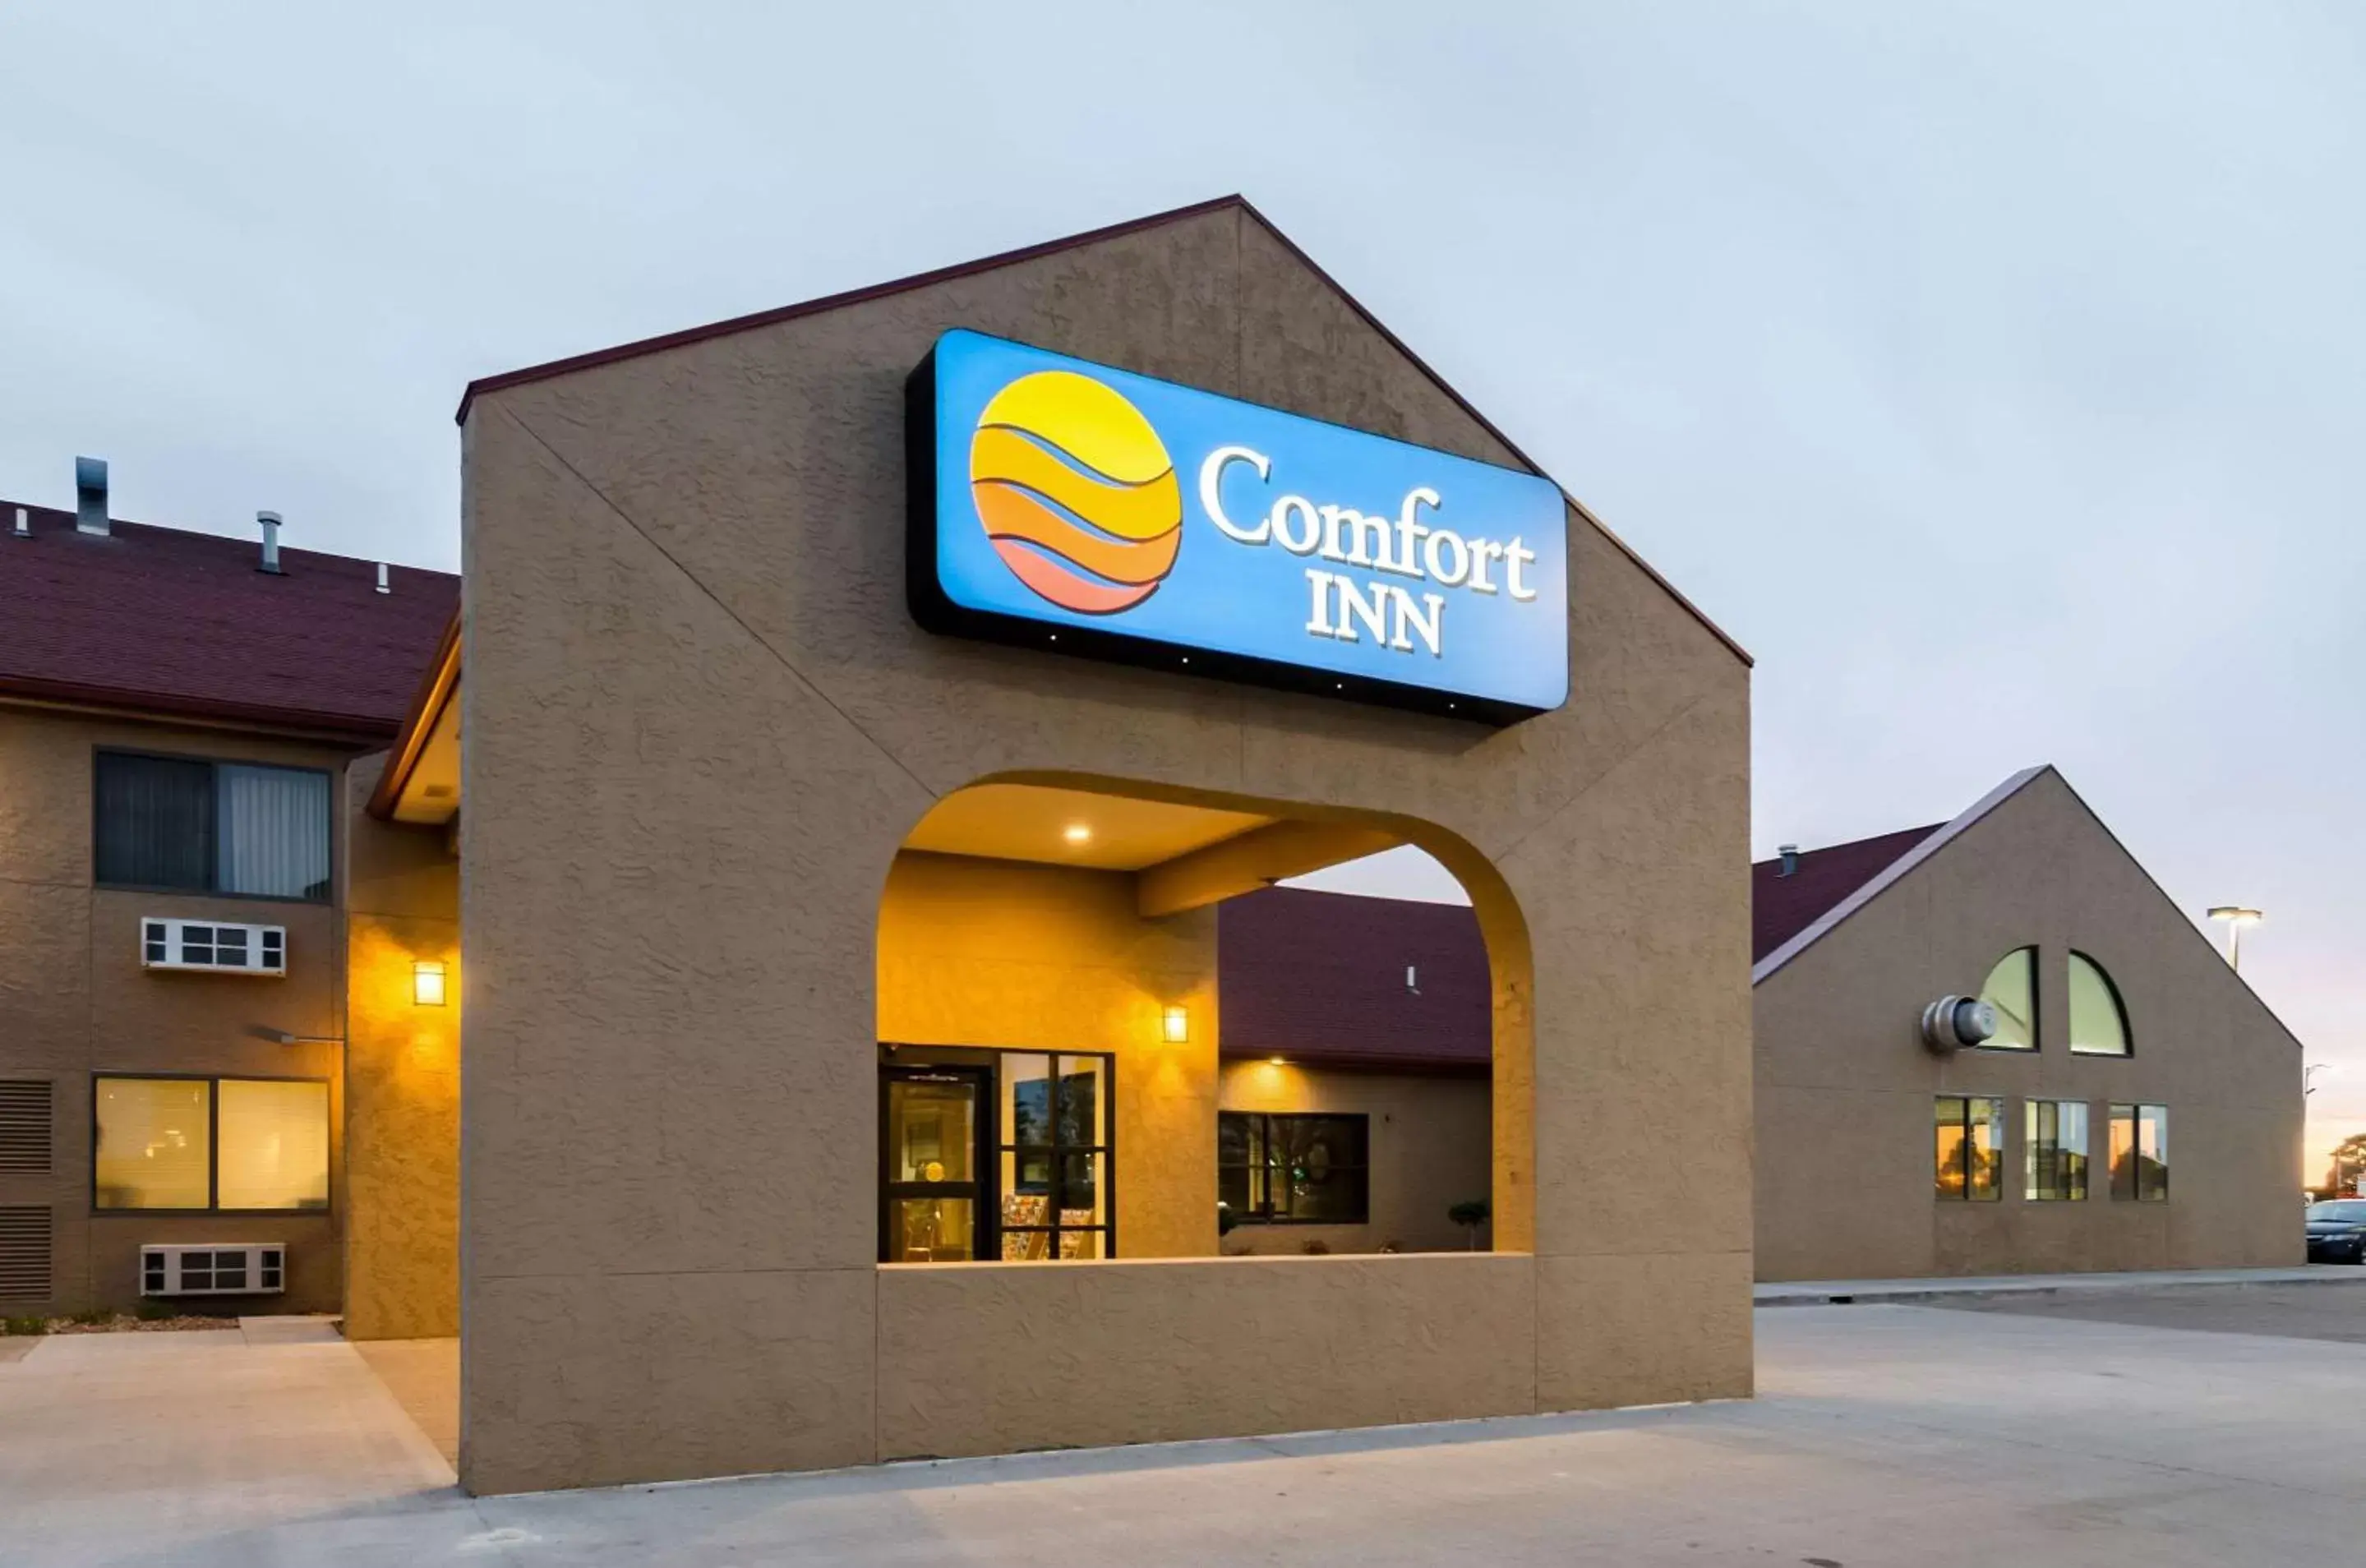 Property building in Comfort Inn Colby